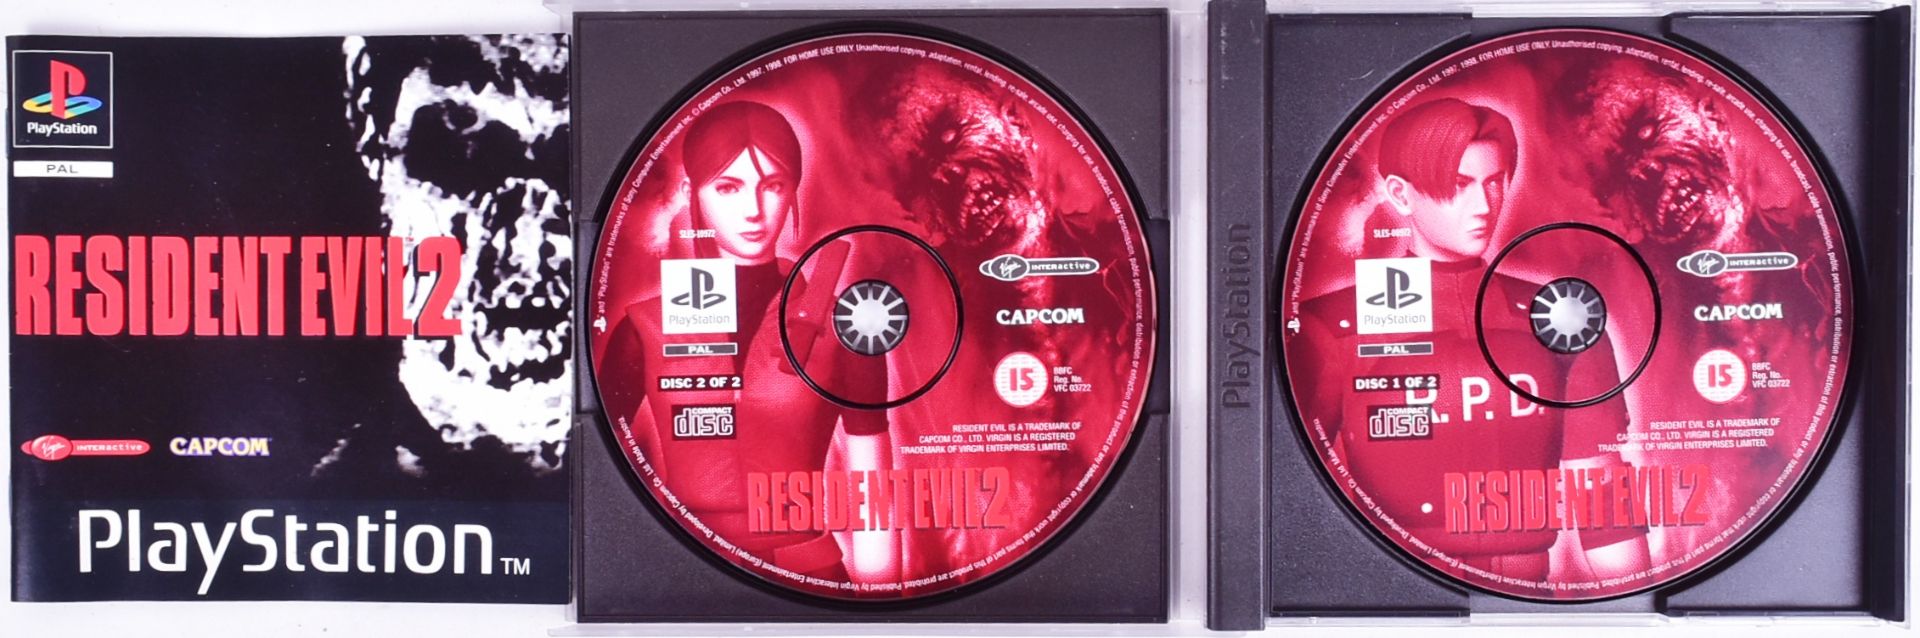 RETRO GAMING - PLAYSTATION ONE - RESIDENT EVIL 1 2 & 3 - Image 2 of 4